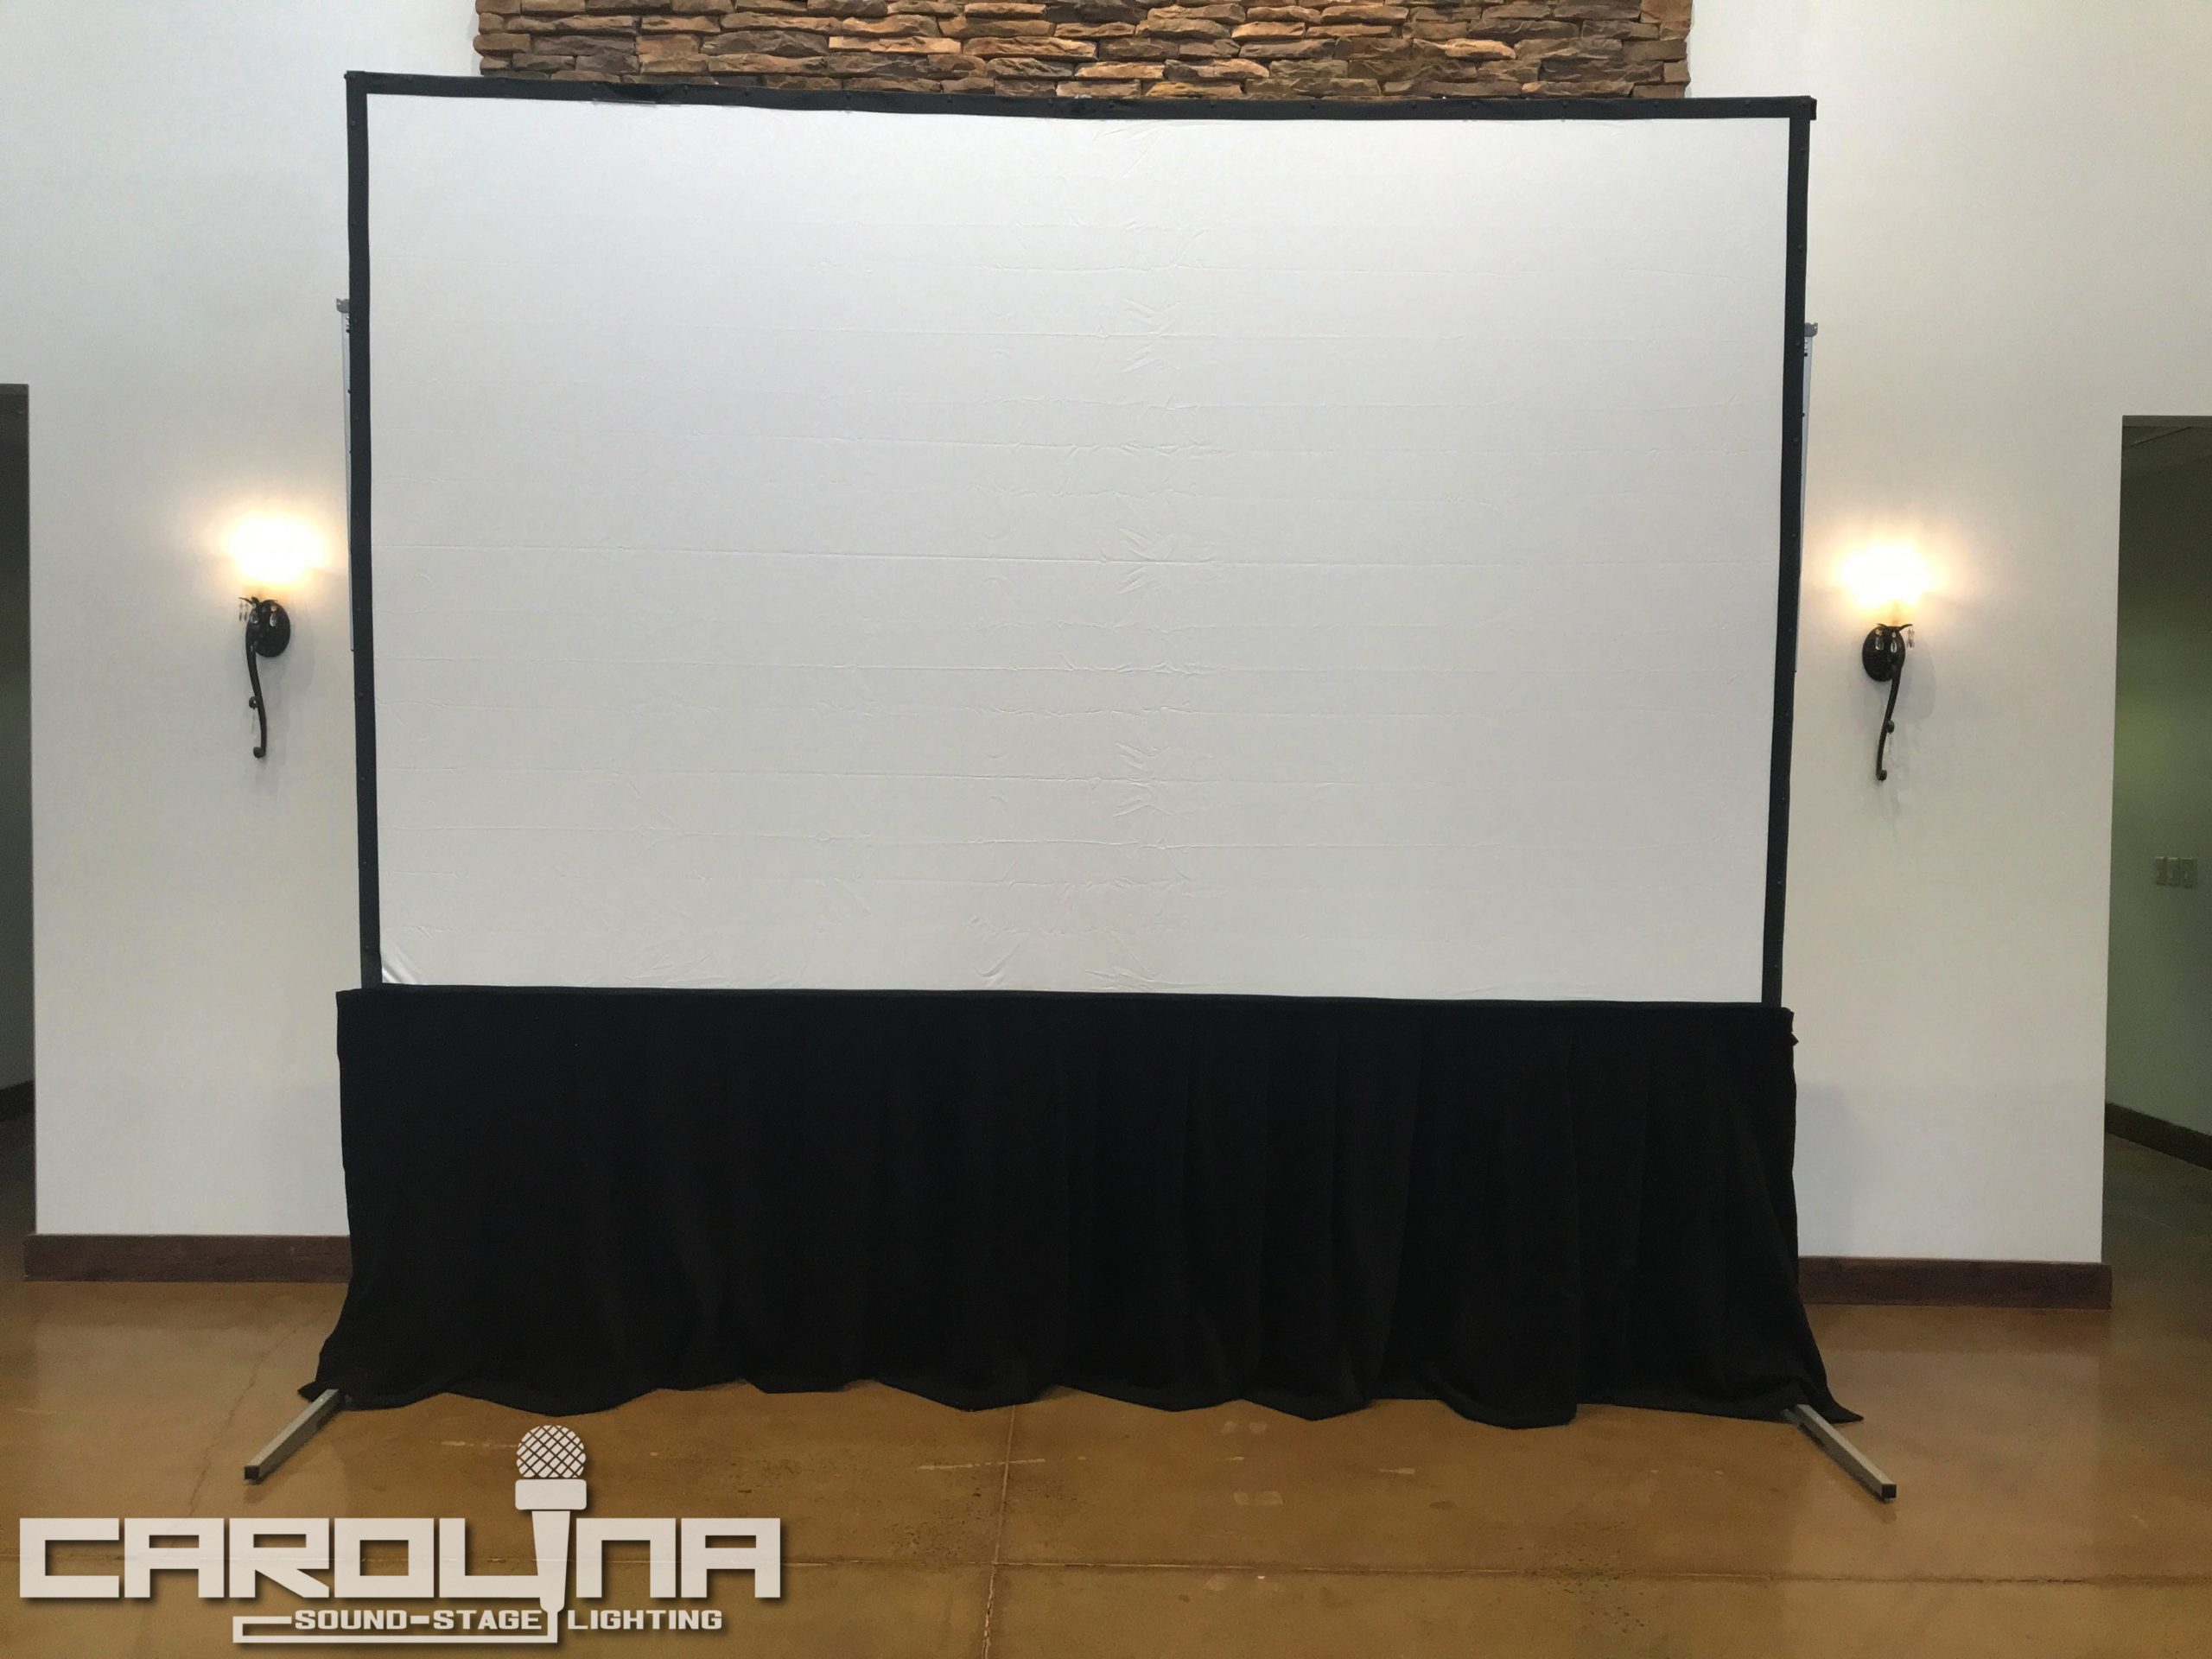 fast-fold projection screen rental Charlotte nc sc Carolina Sound stage lighting corporate event production